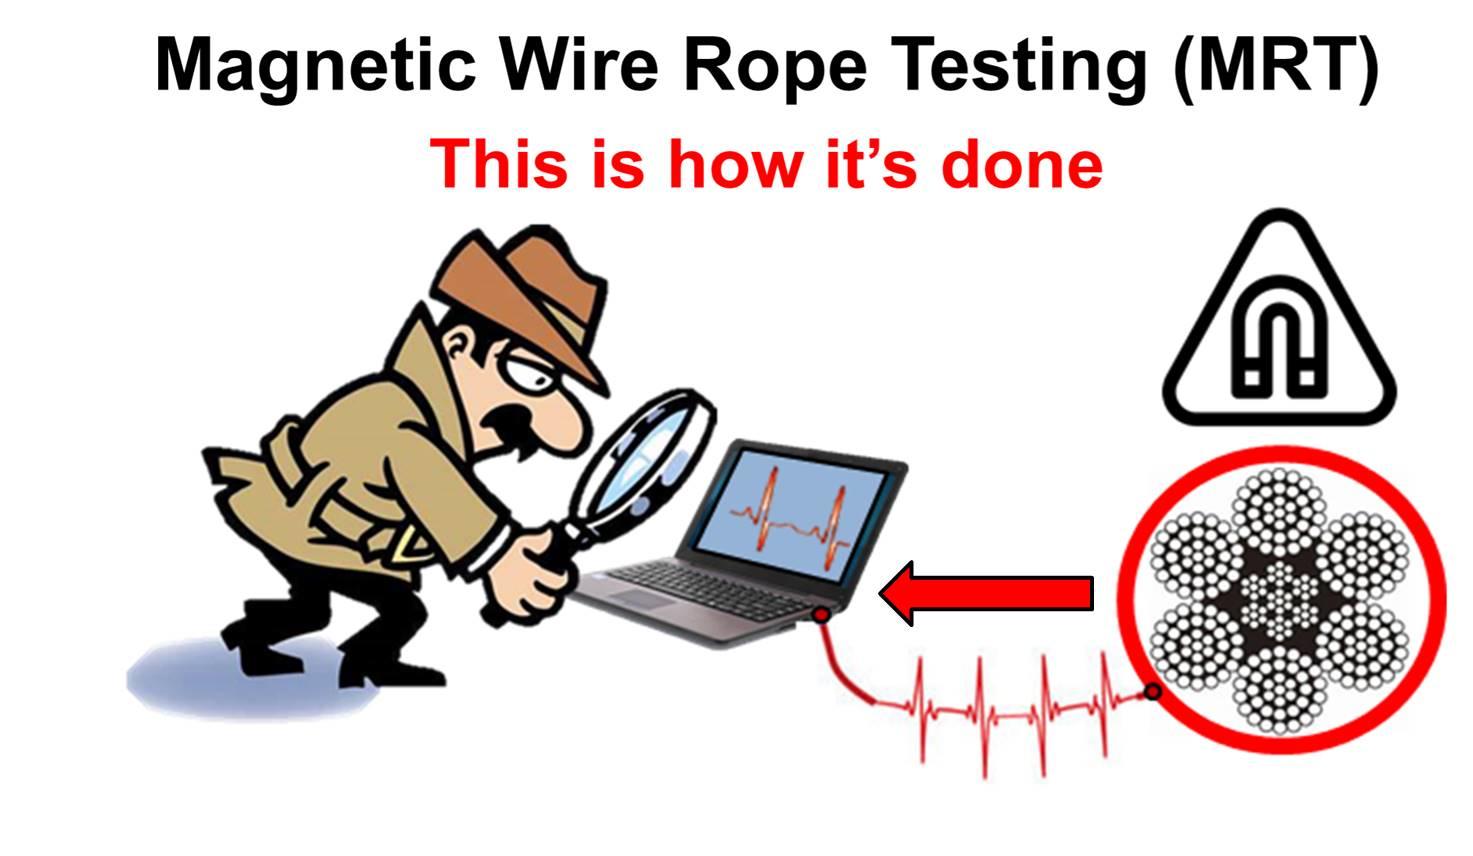 MAGNETIC WIRE ROPE TESTING (MRT): This is how it's done! NDT Technology, LLC